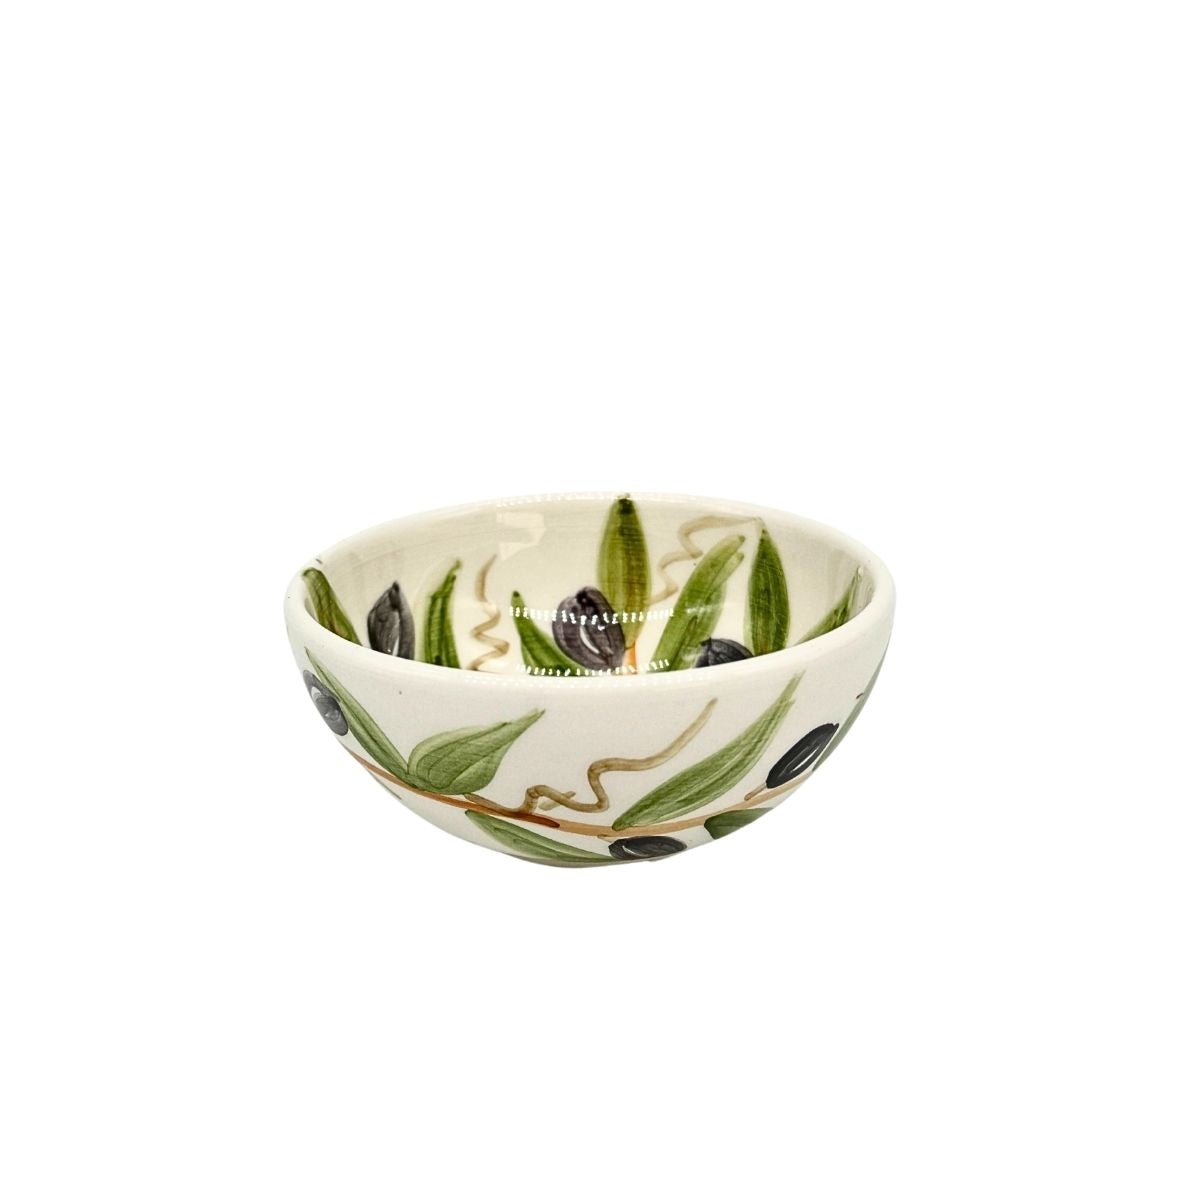 Ceramic "Dipping" Bowl (3.5 inches) - Olives